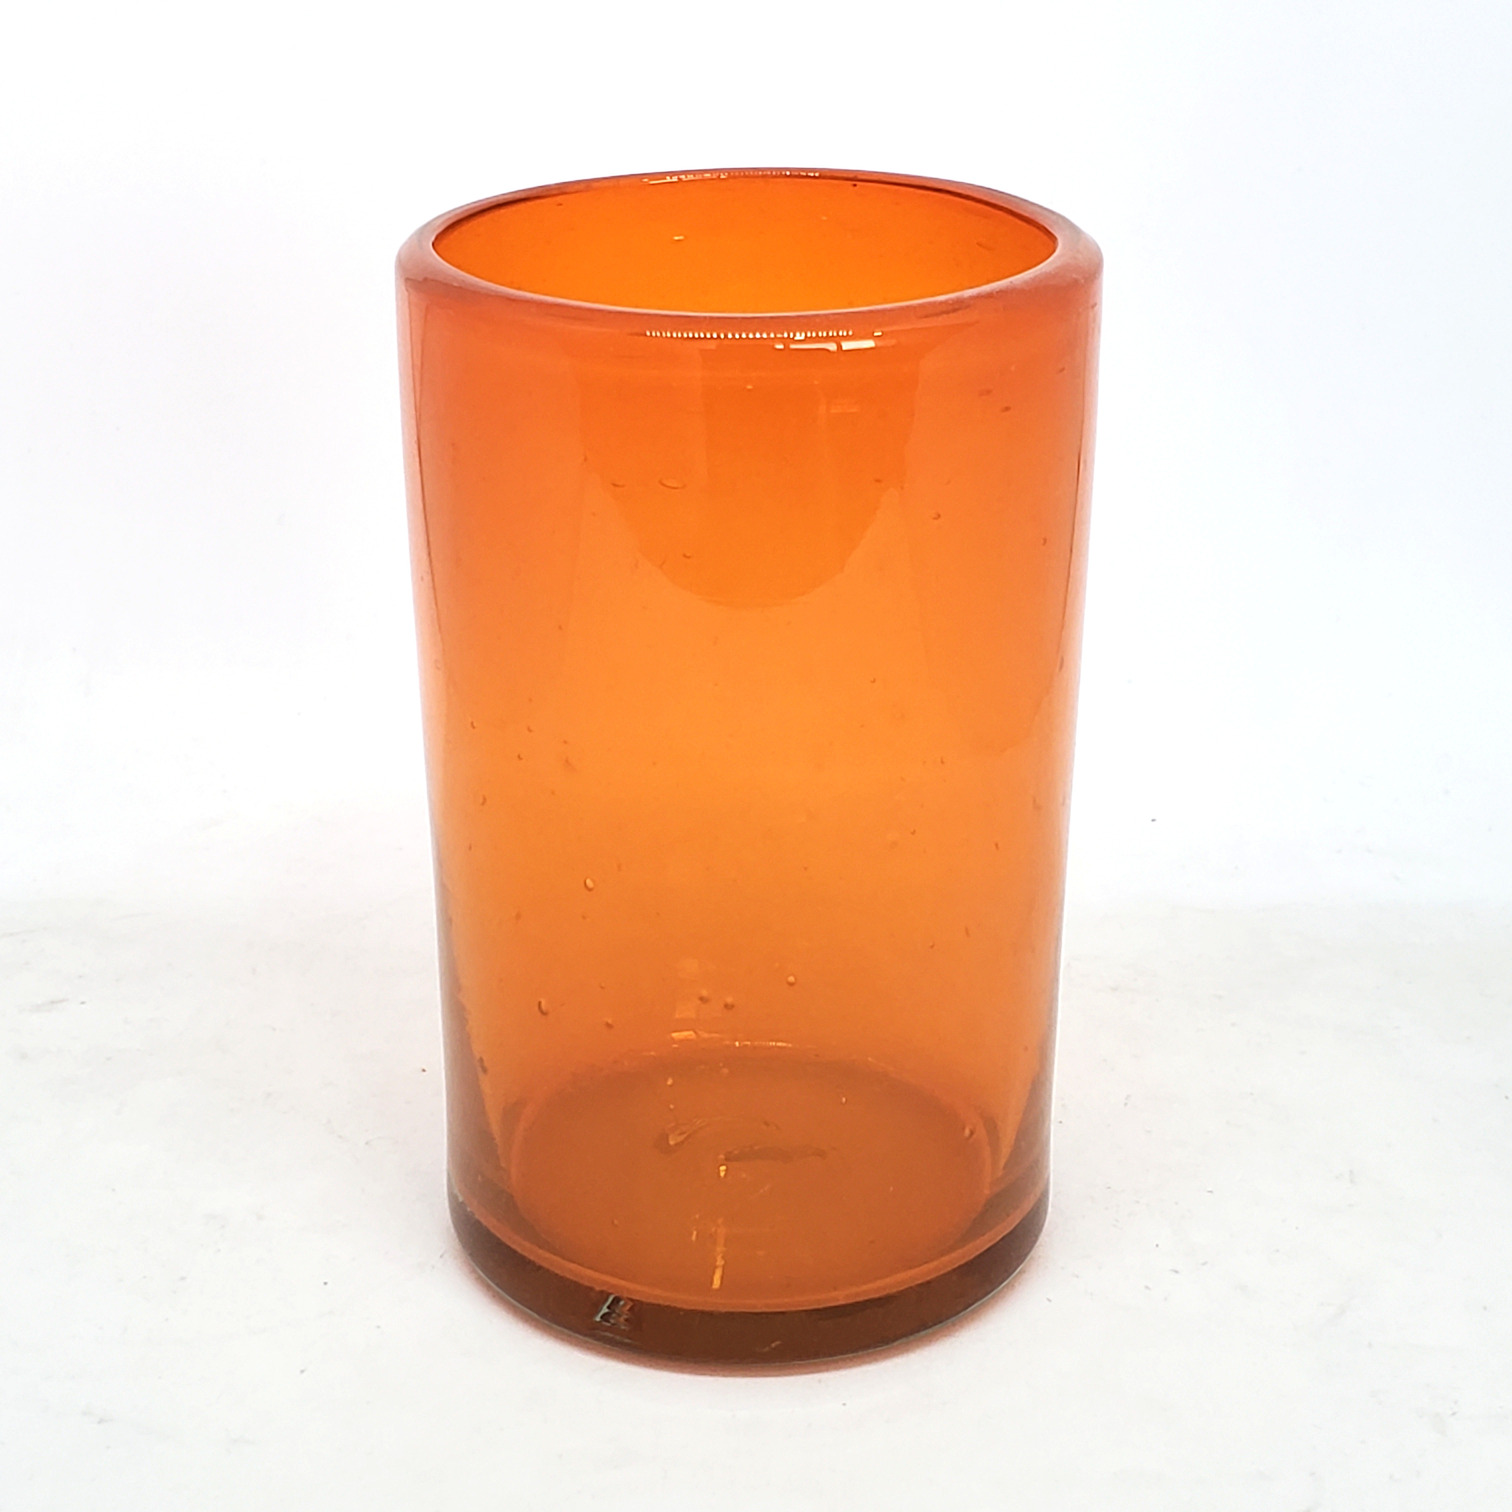 MEXICAN GLASSWARE / Solid Orange 14 oz Drinking Glasses (set of 6)